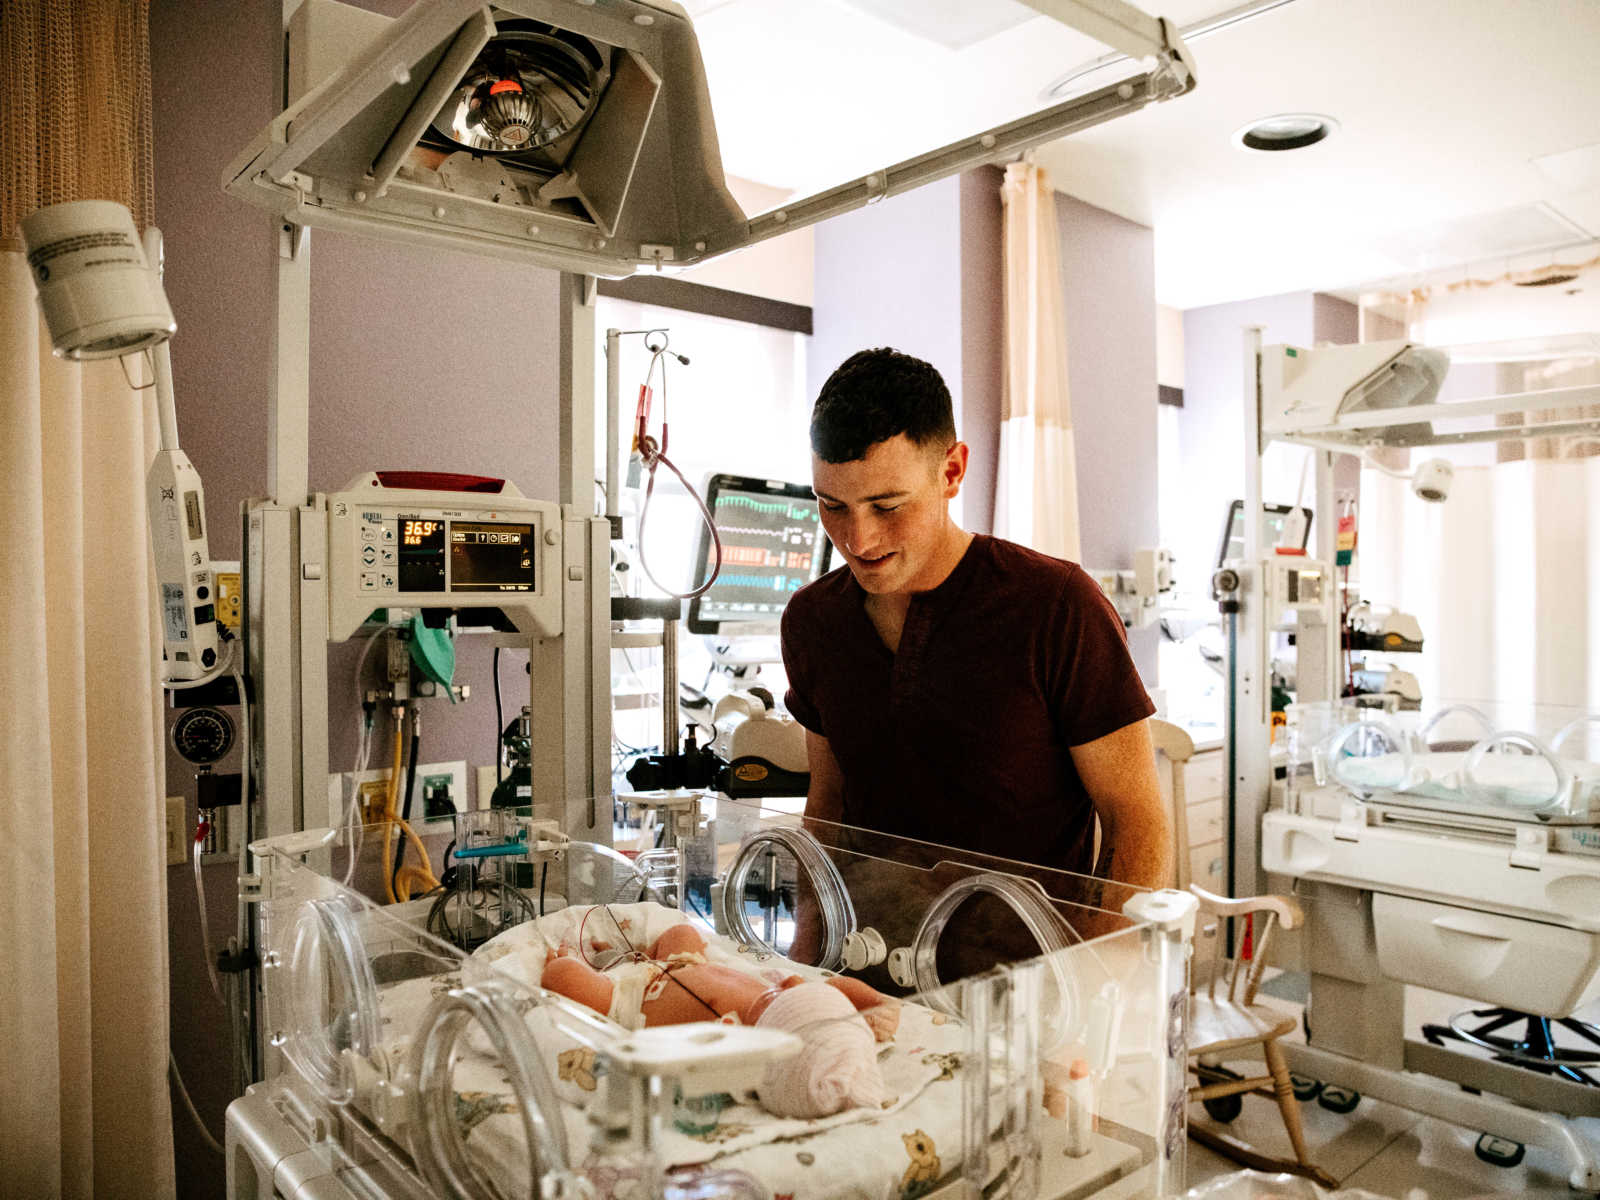 Father of newborn who was birthed via c-section watches baby sleep in NICU